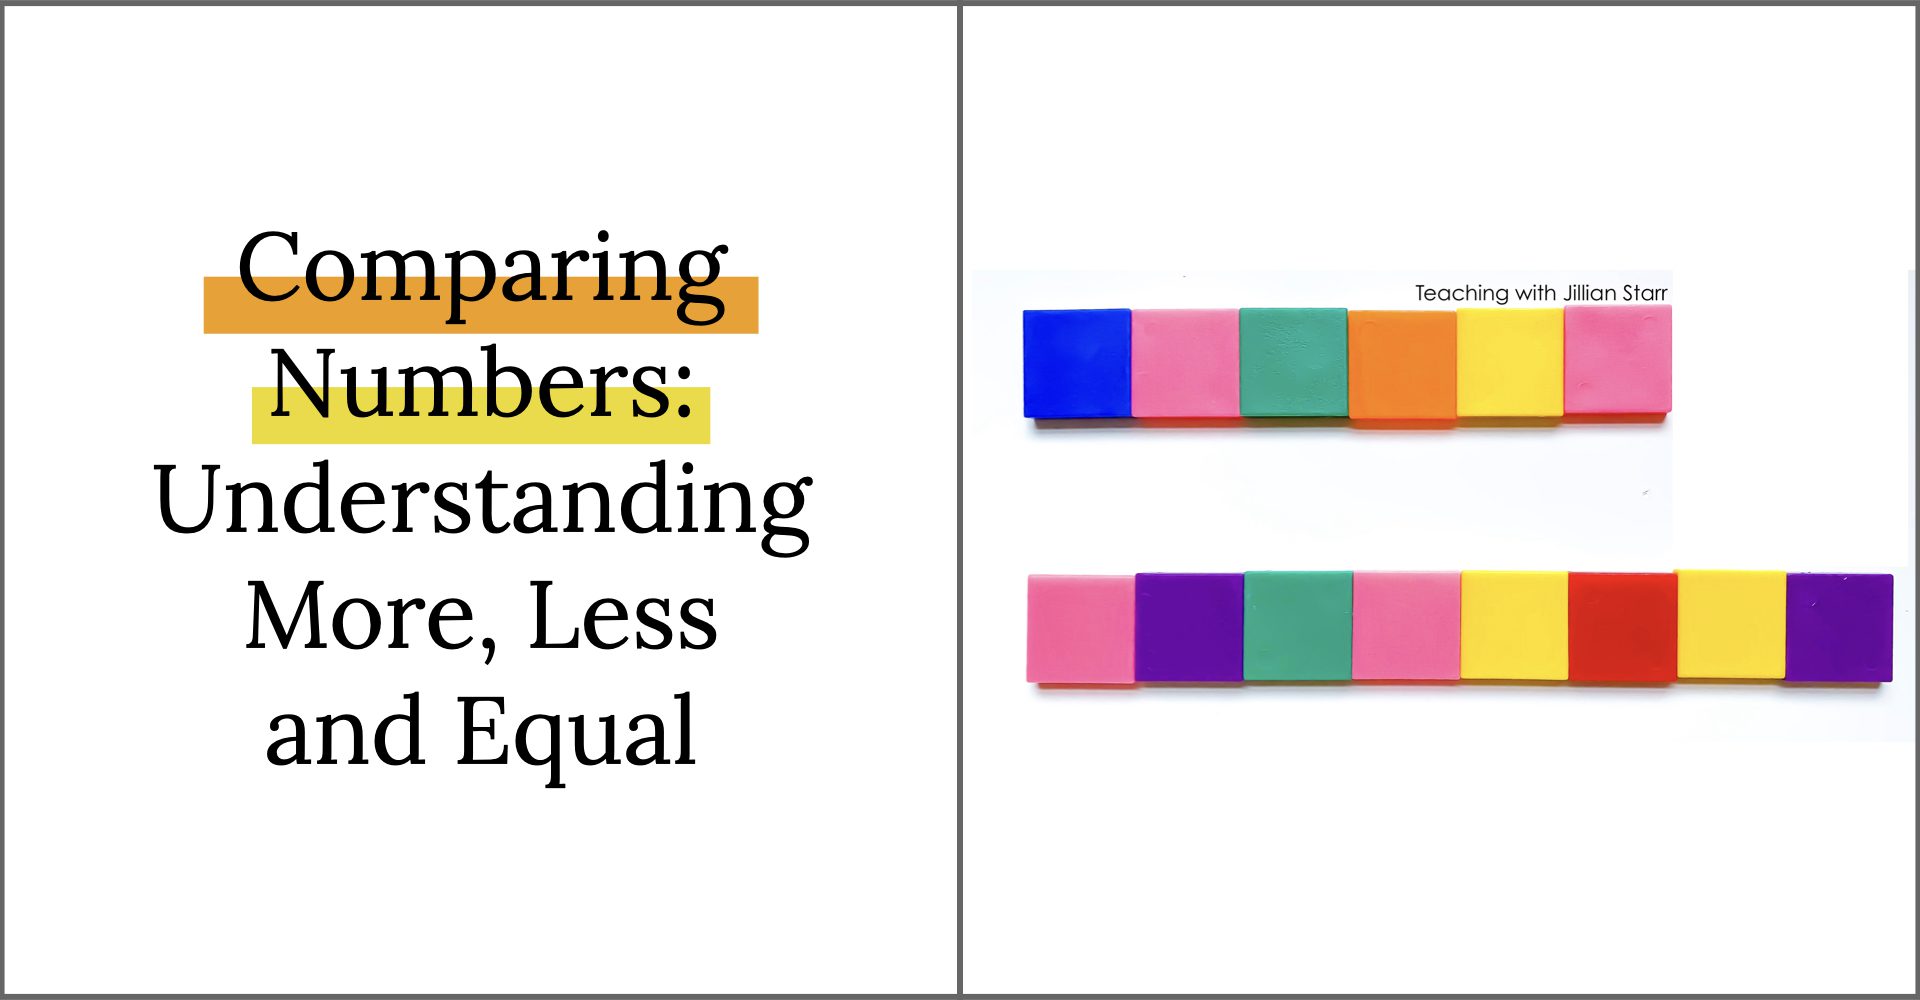 Comparing Numbers and understanding more, less, and equal